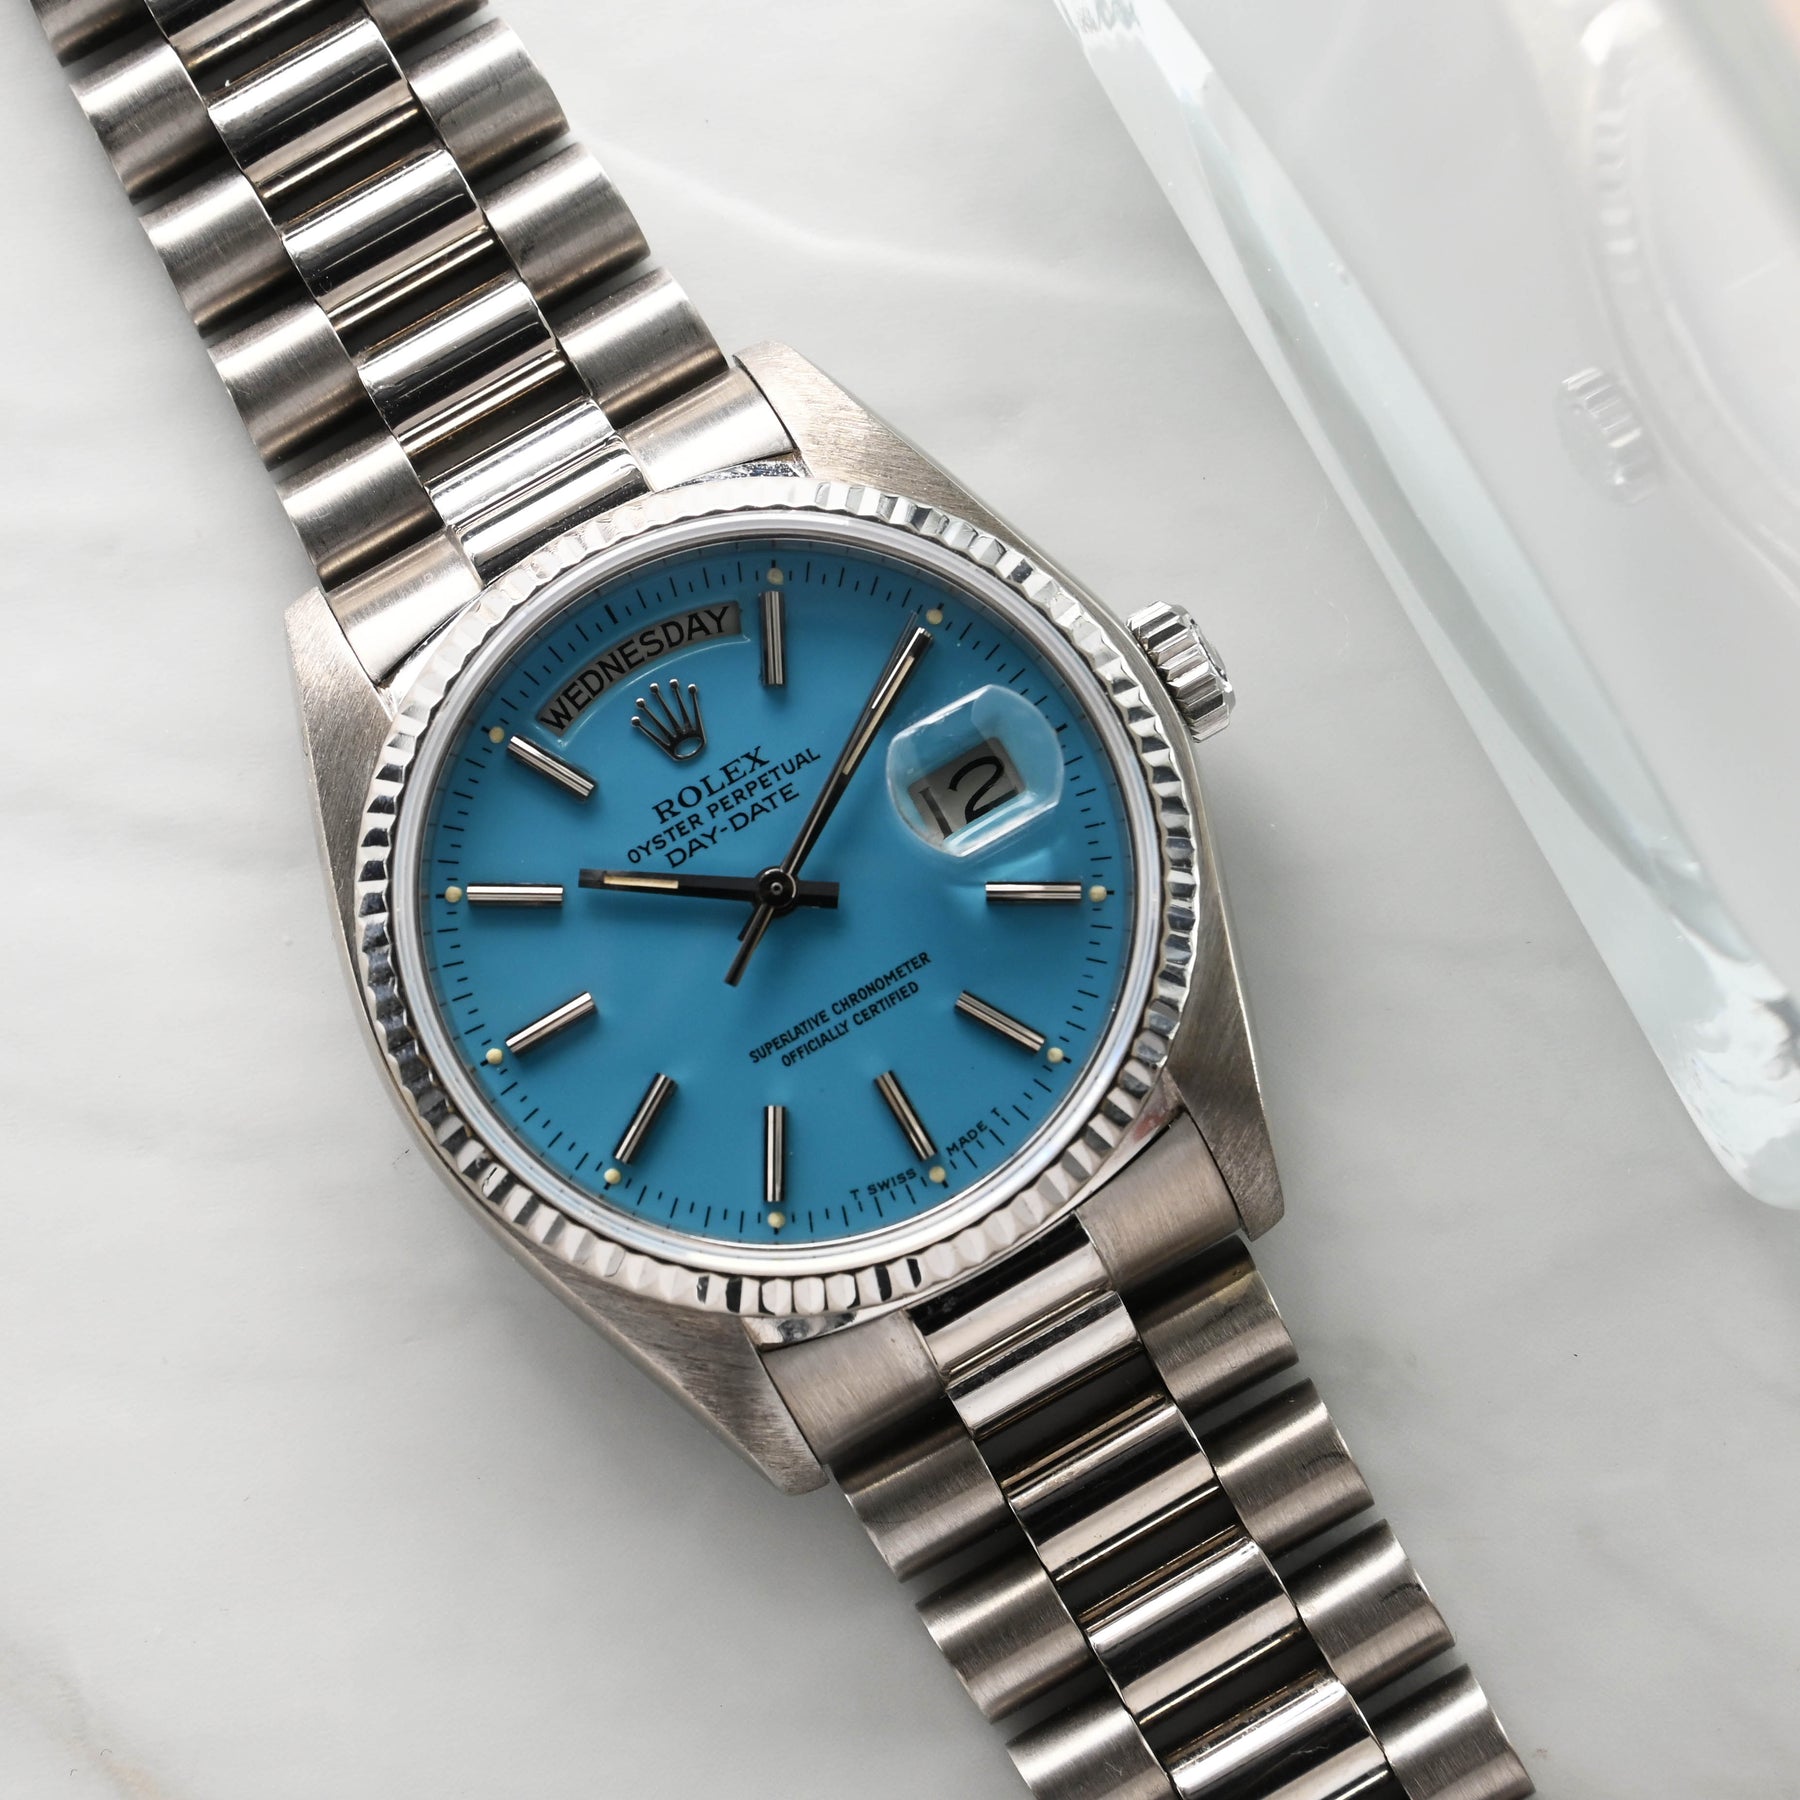 1981 Rolex Day Date White Gold Turquoise Stella Dial Ref. 18039